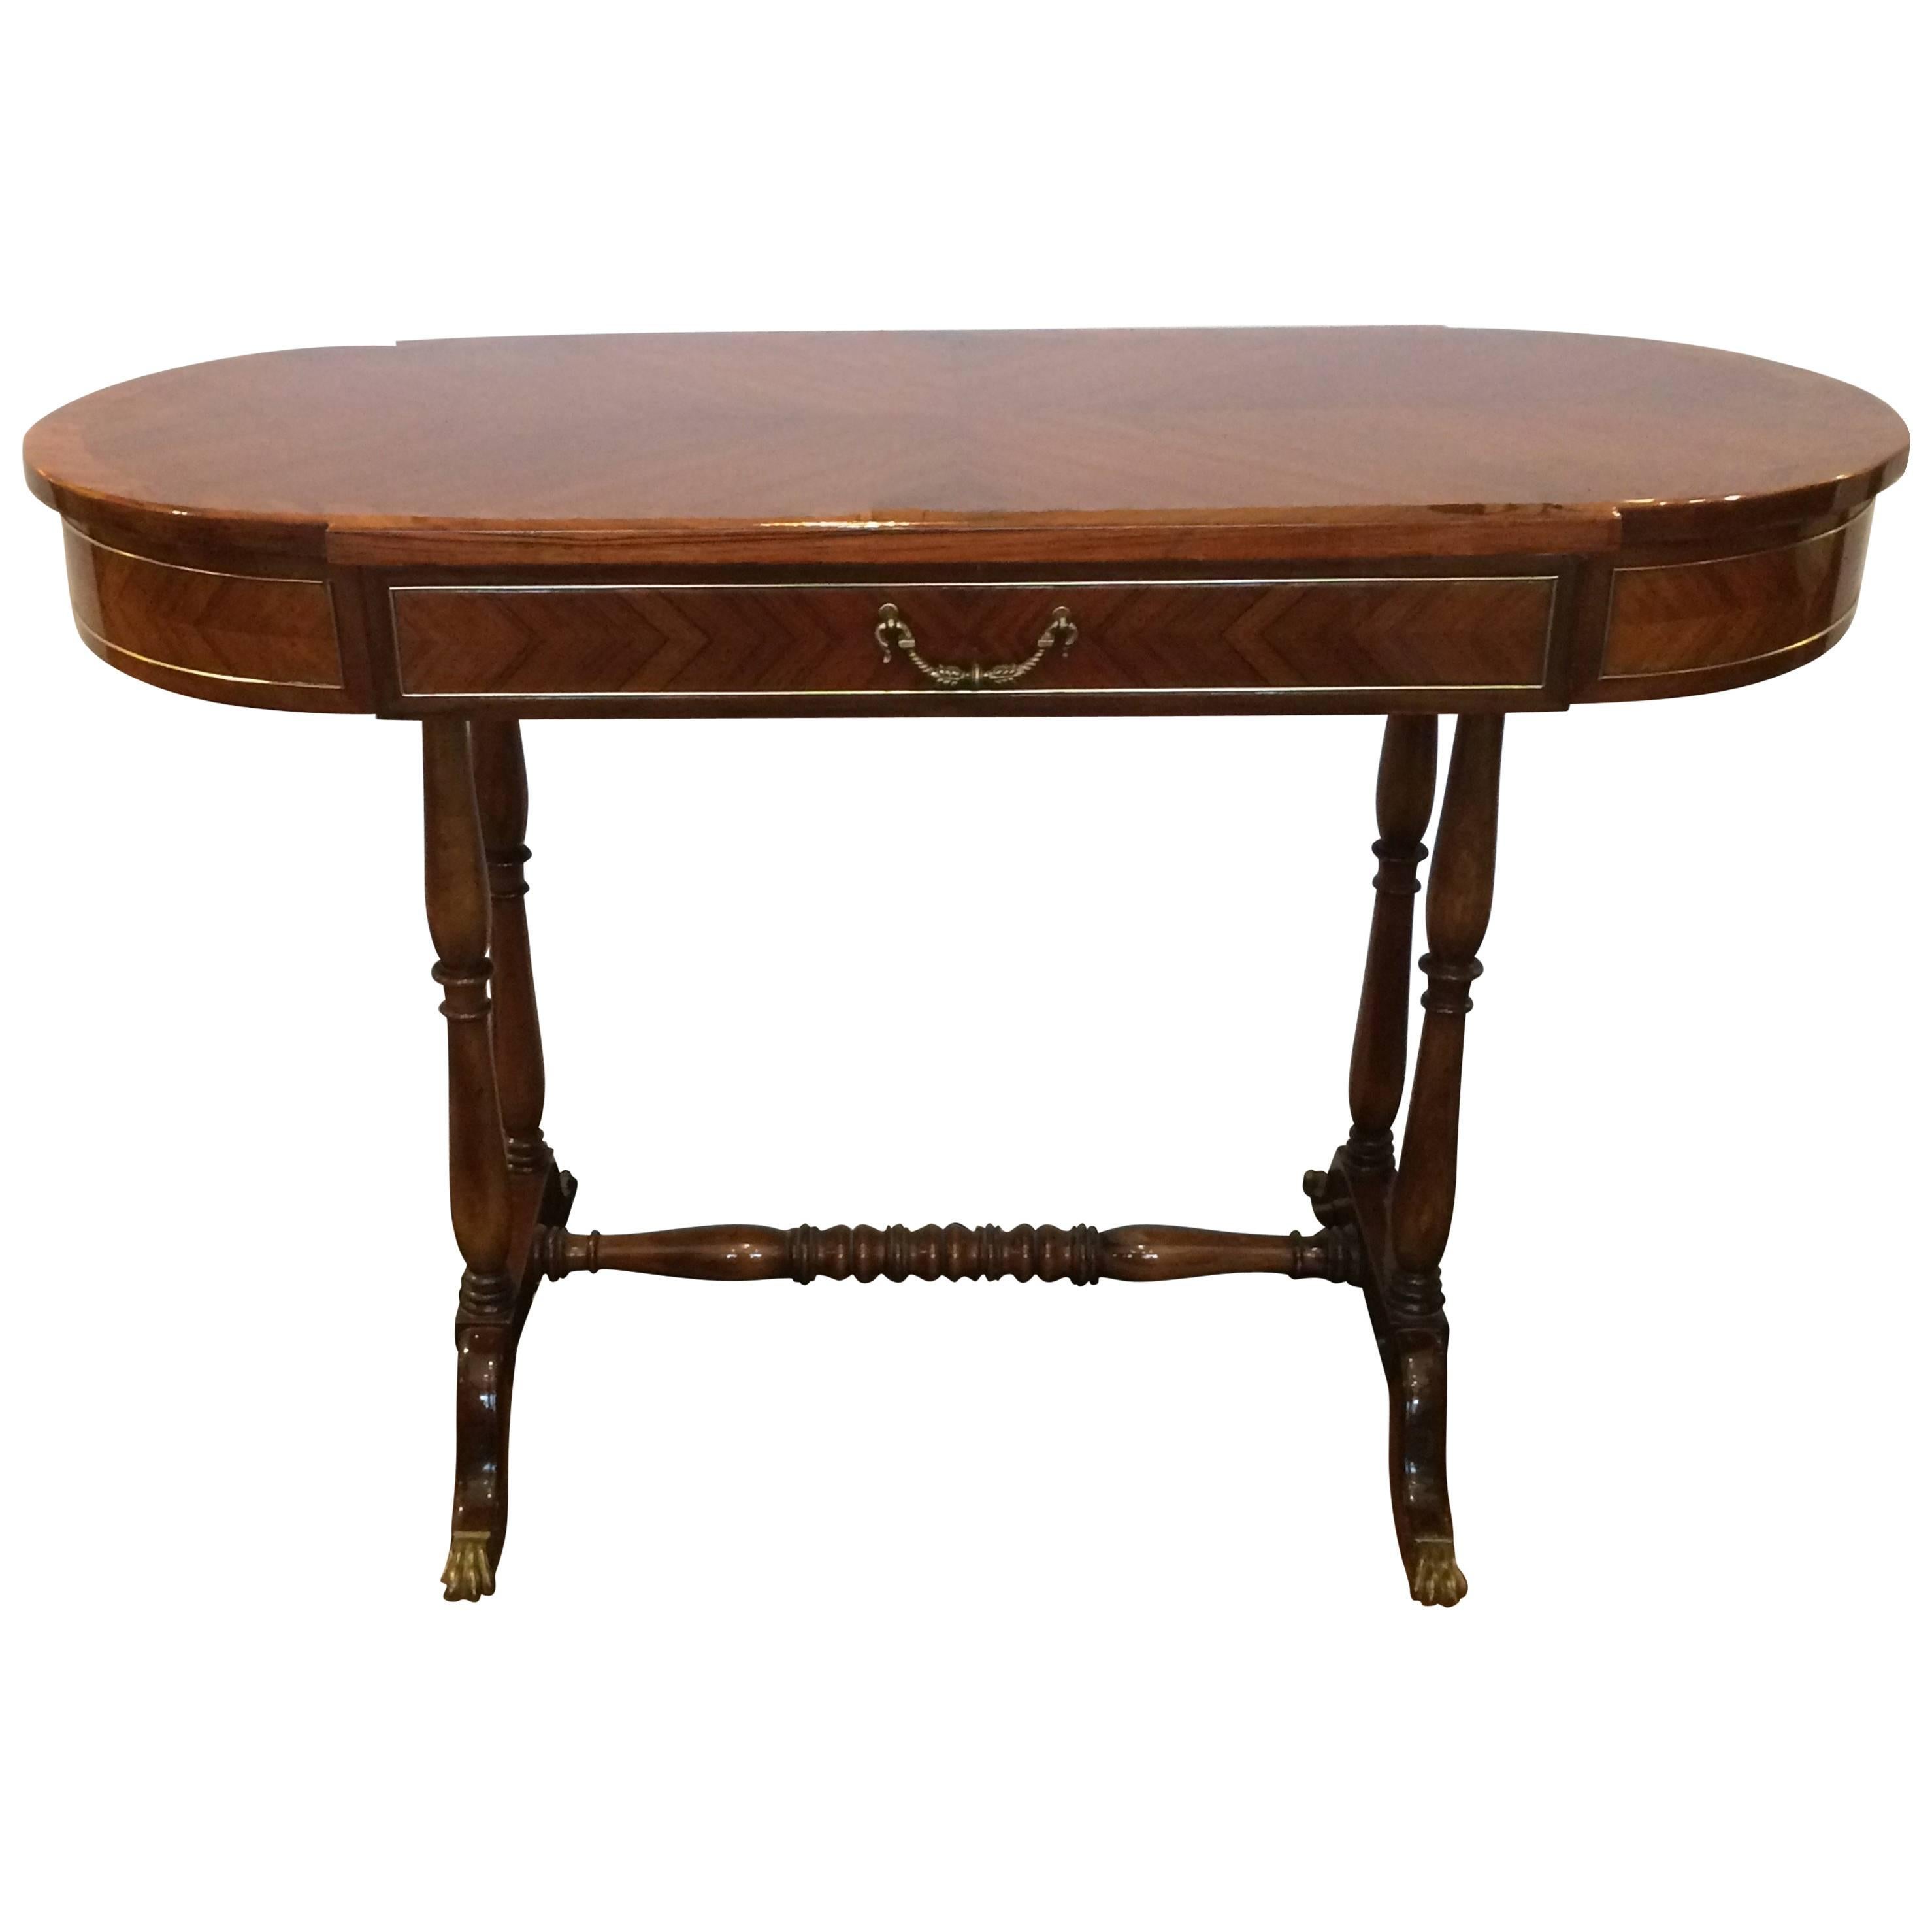 Very Elegant Glossy Wood Console Table or Writing Desk